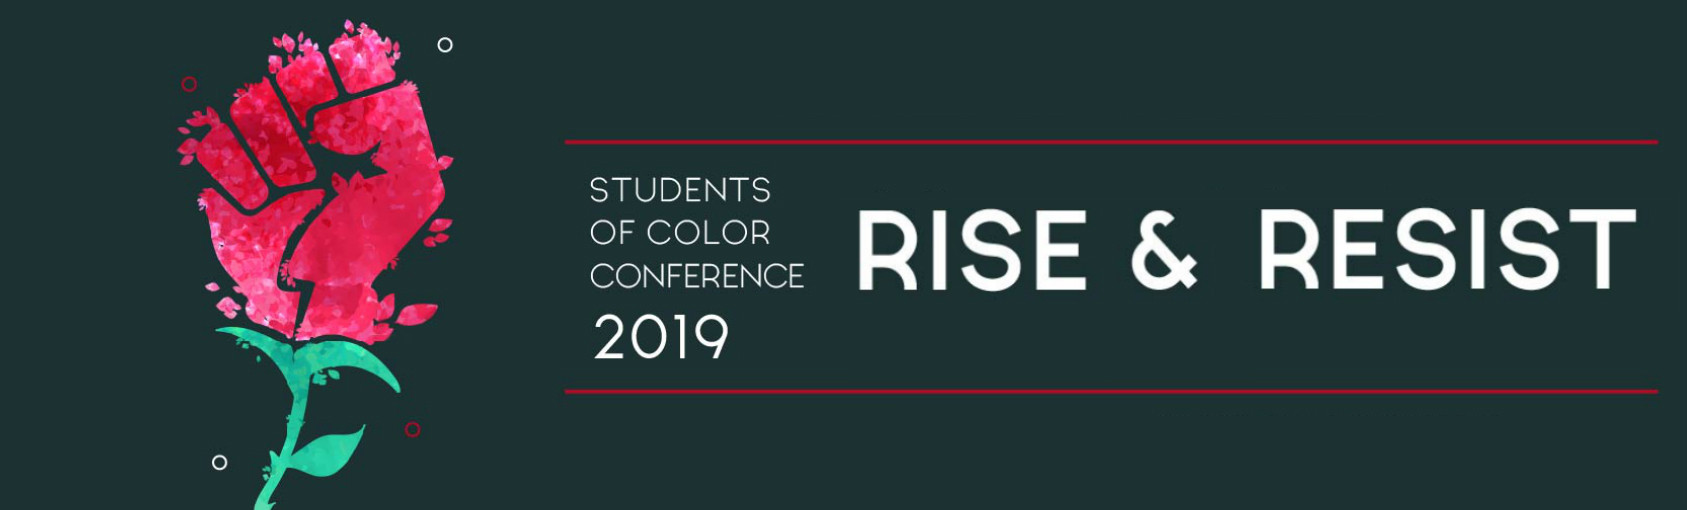 Rise & Resist at the Students of Color Conference Banner